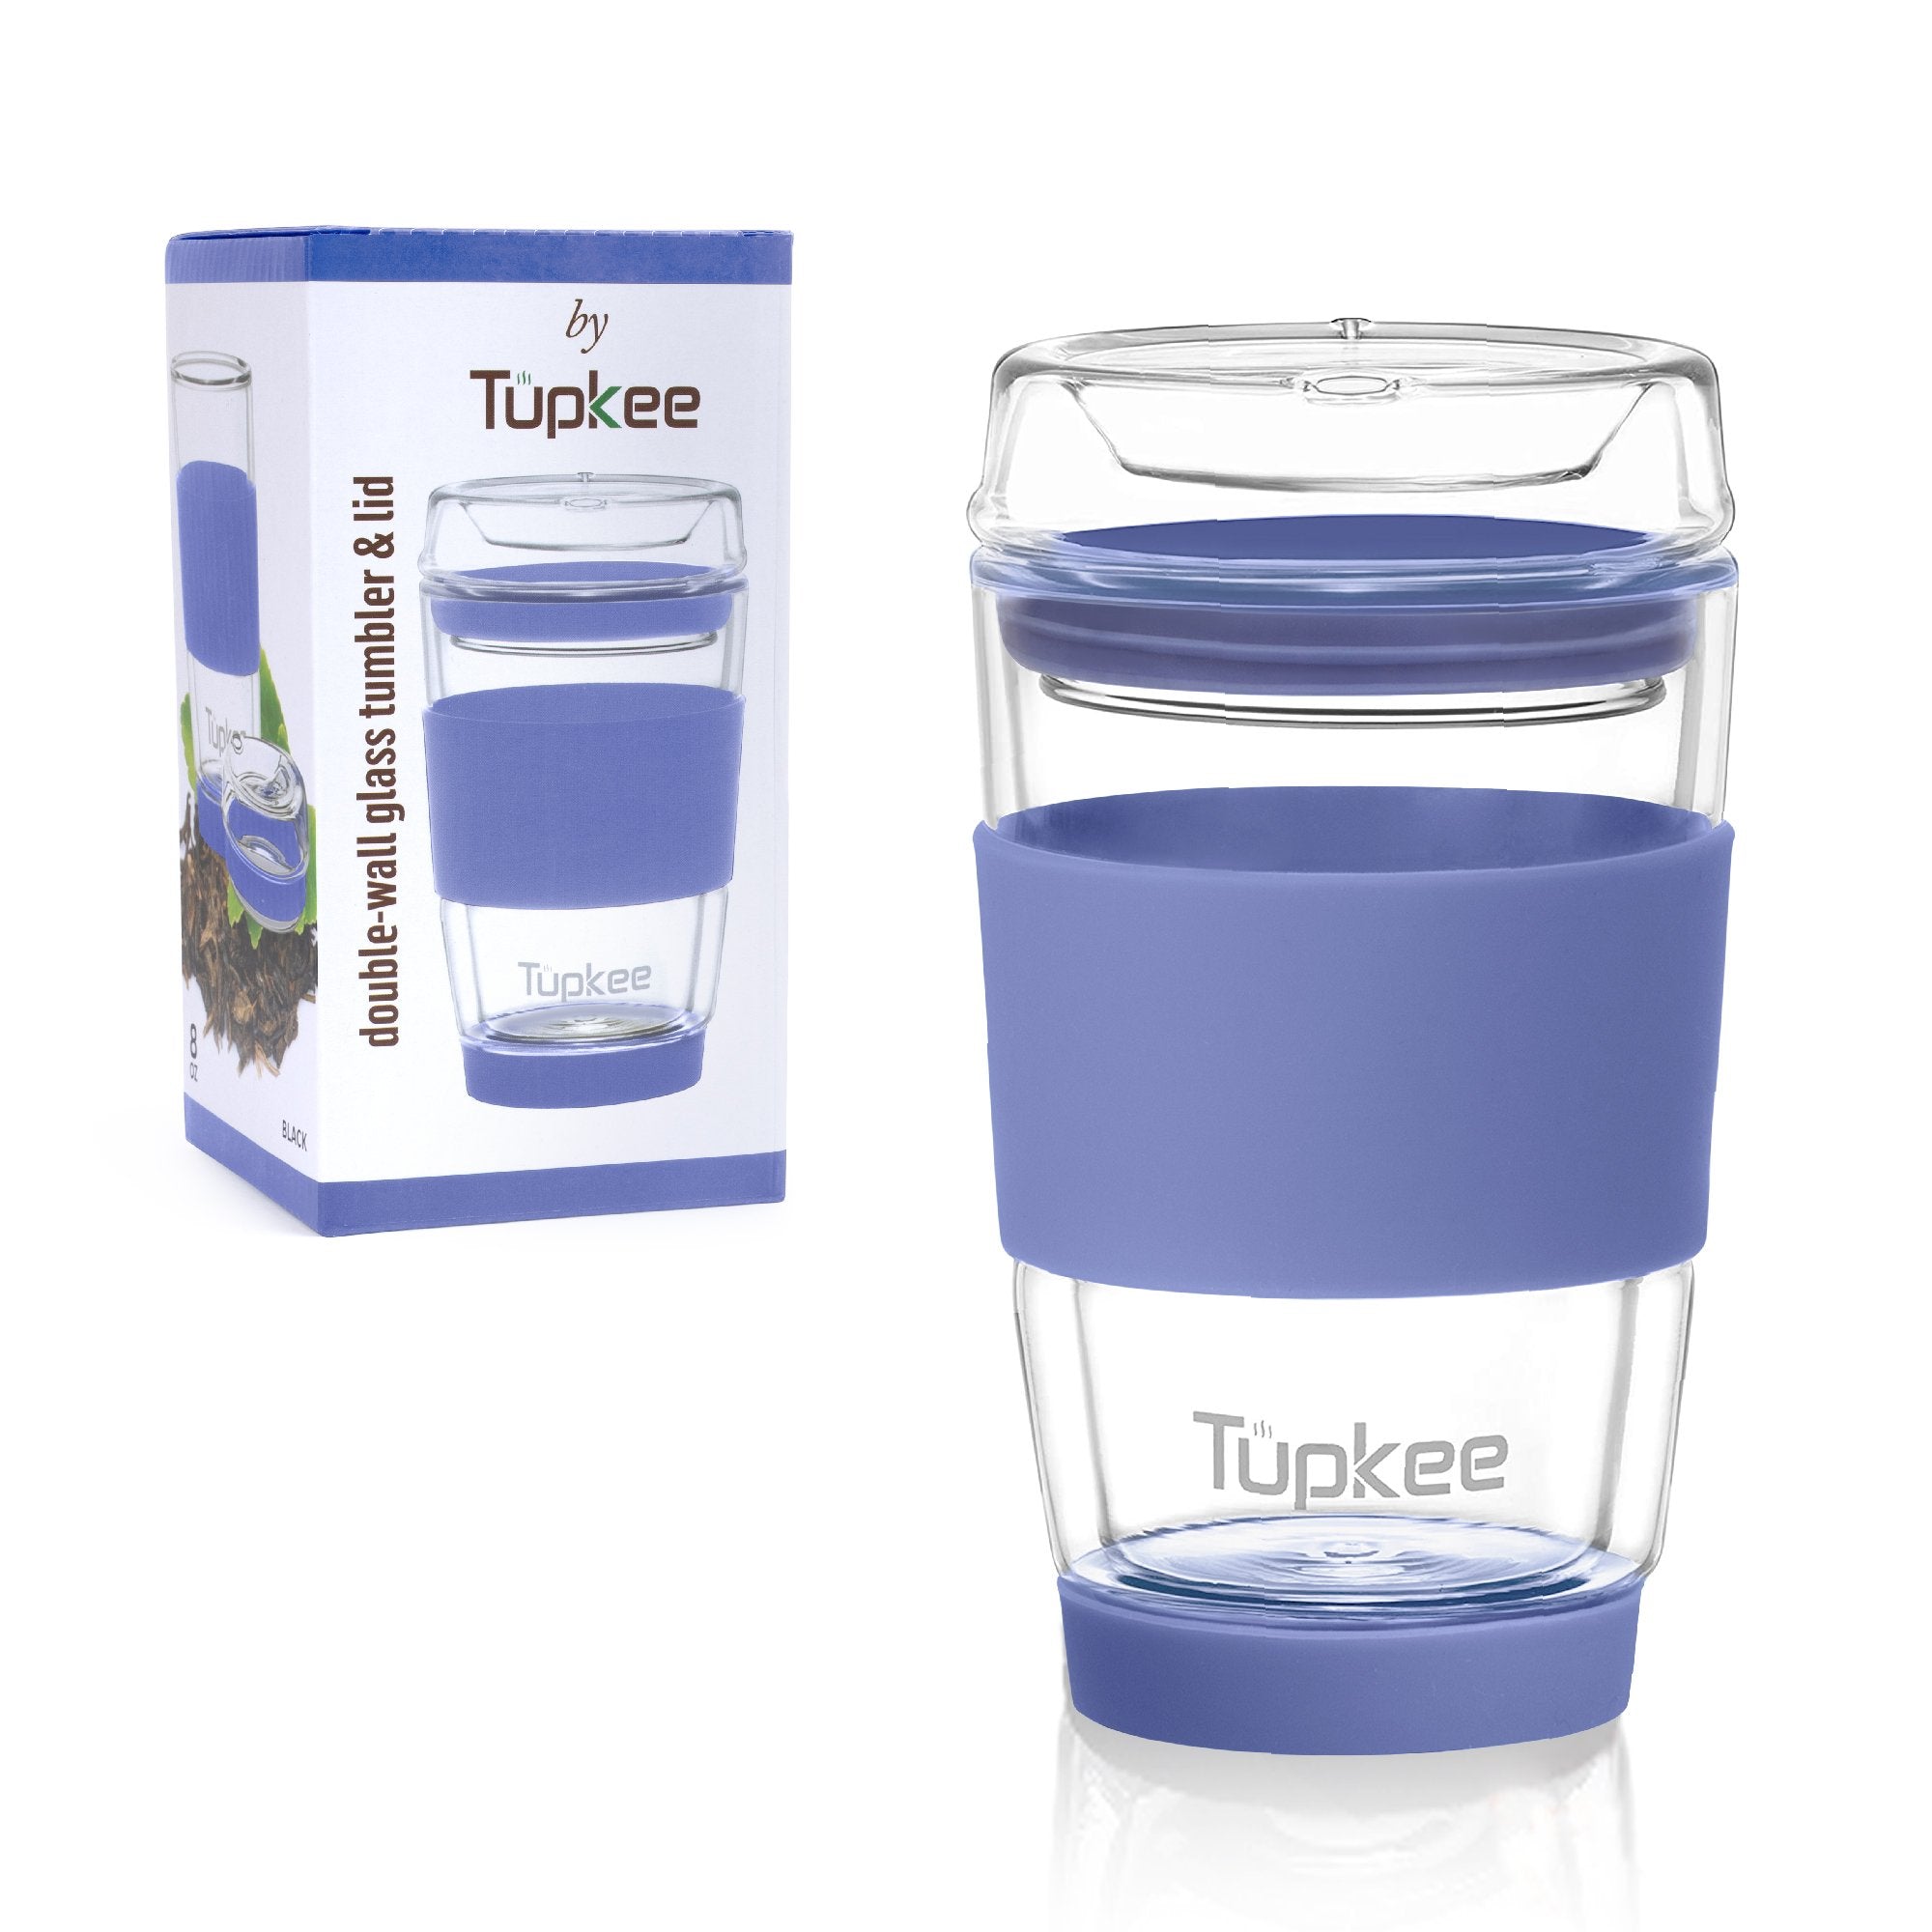 ecoBrew 12oz Double Wall Glass Tumbler with Lid, Insulated  Glass Travel Coffee Mug, Dishwasher Safe & Microwavable Clear Coffee  Tumbler To Go, Reusable Travel Cup, Ceramic coffee mug: Tumblers 